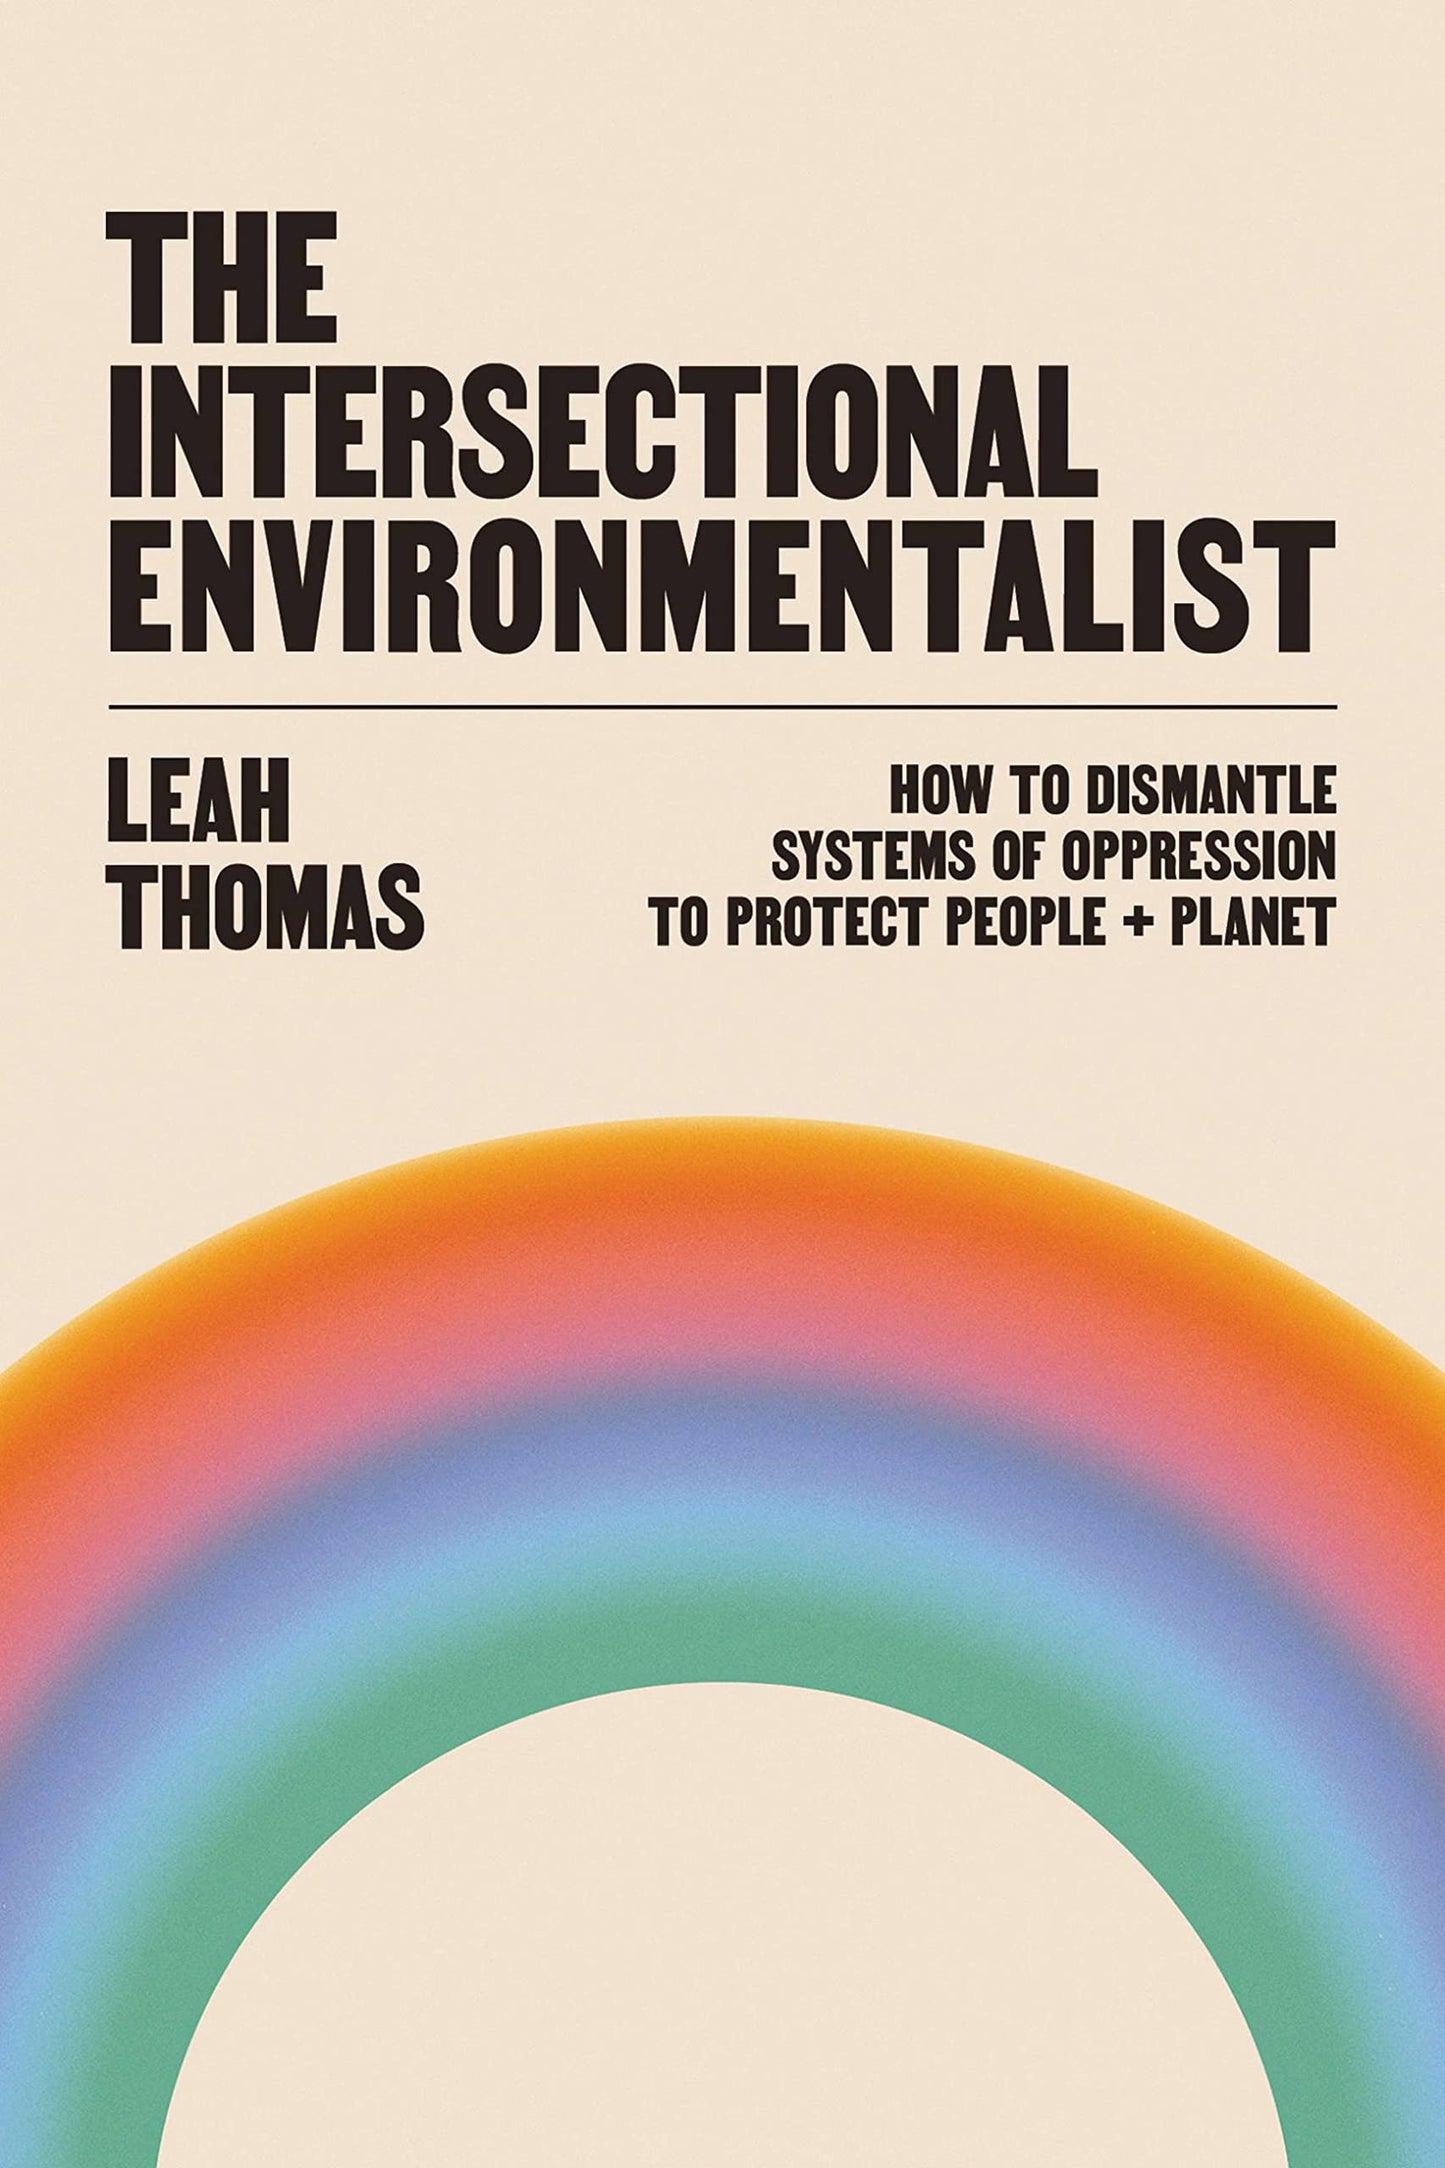 The Intersectional Environmentalist, by Leah Thomas